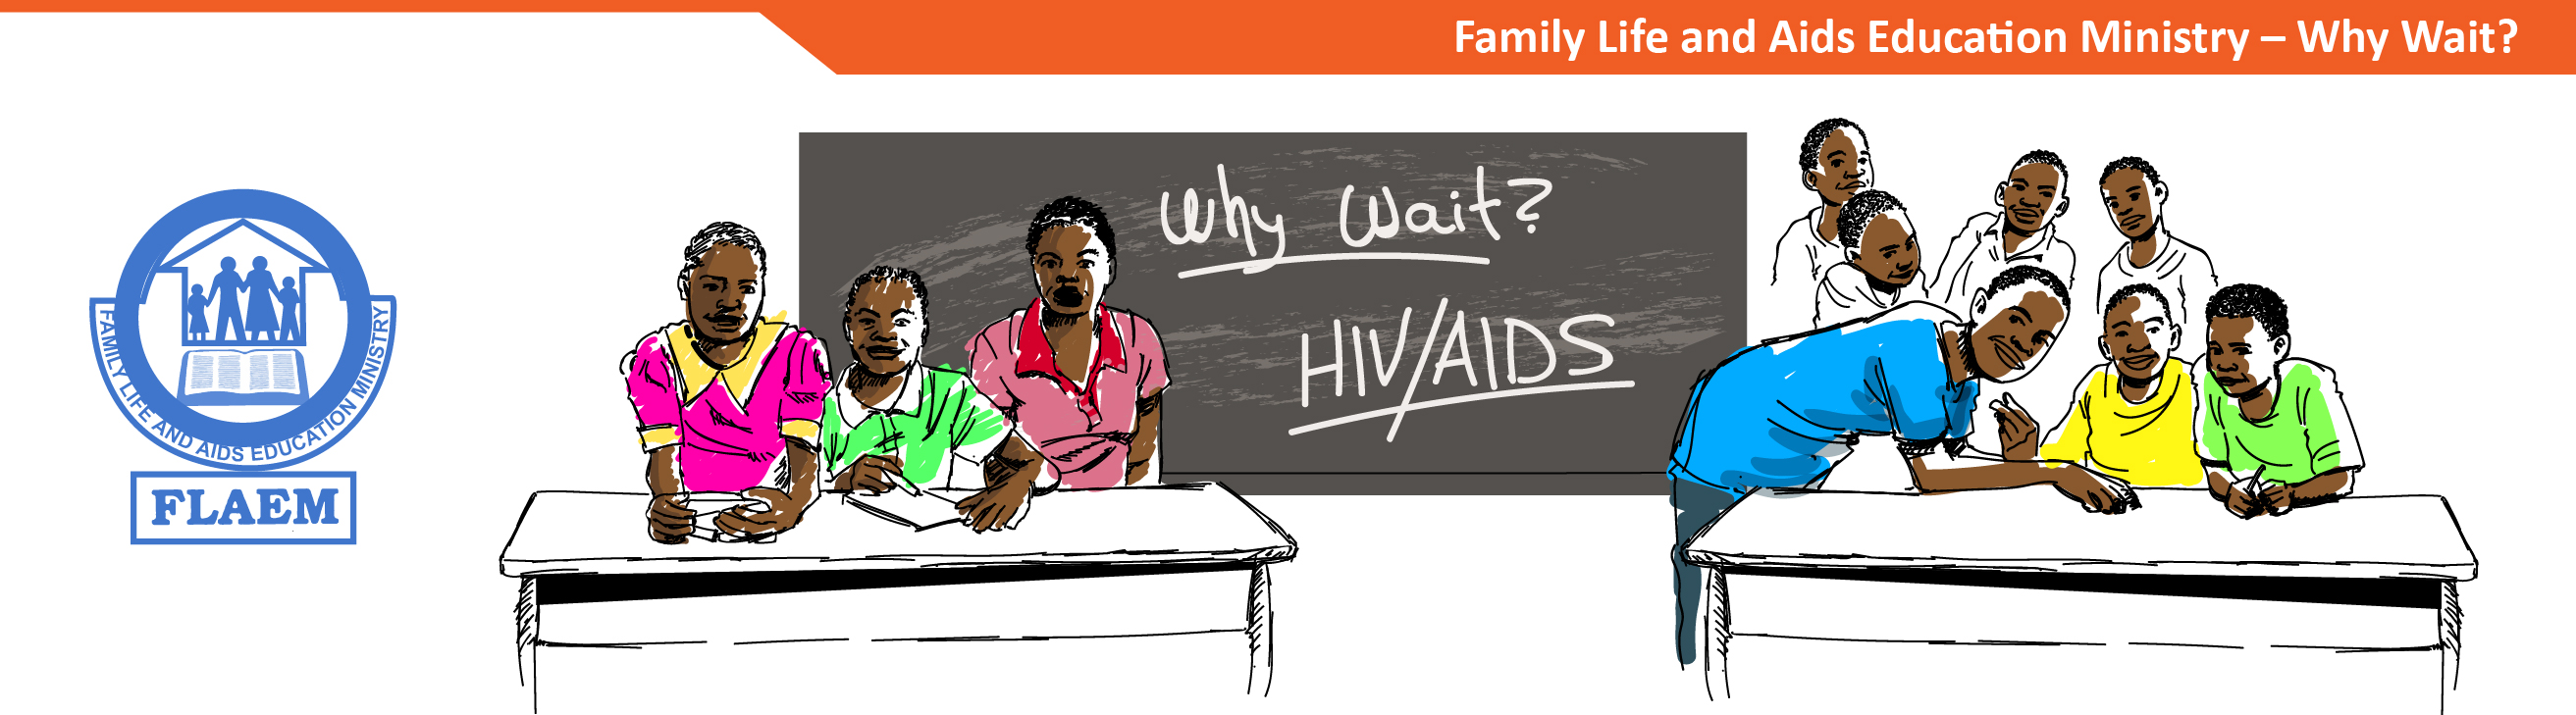 Family Life and Aids Education Ministry - Why Wait?